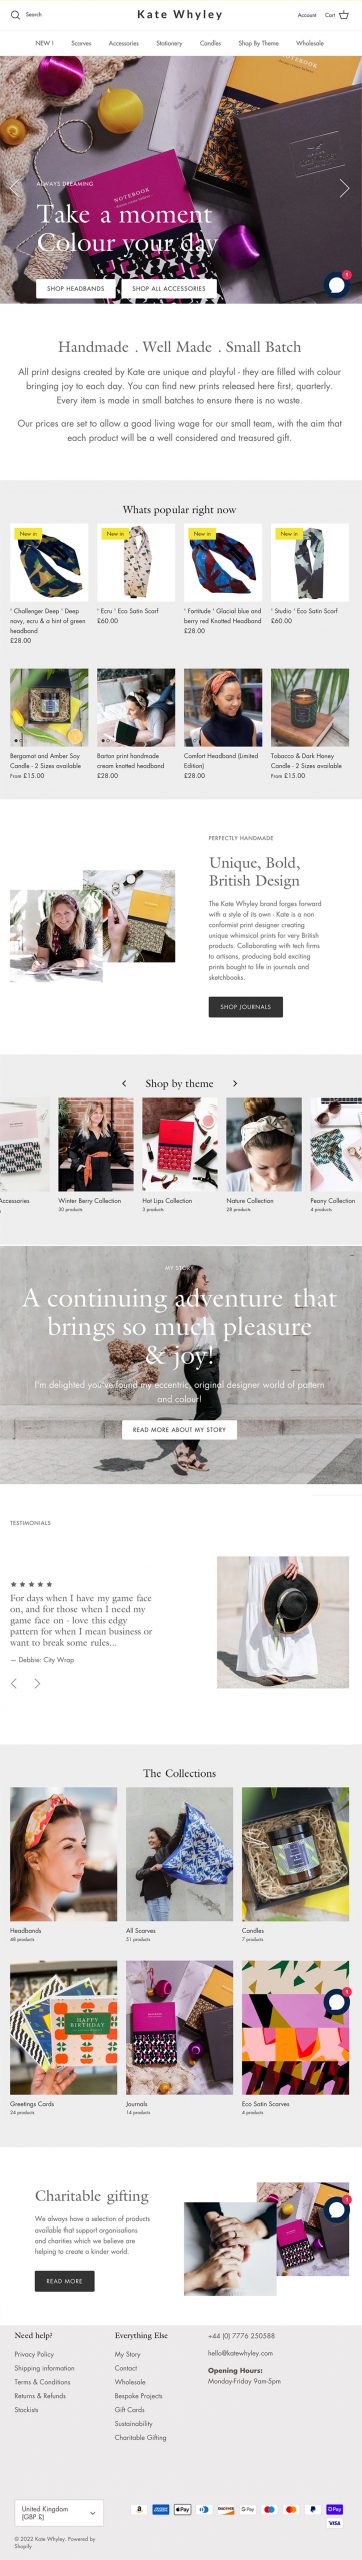 Shopify Refresh of Kate Whyley Symmetry 2.0 store theme